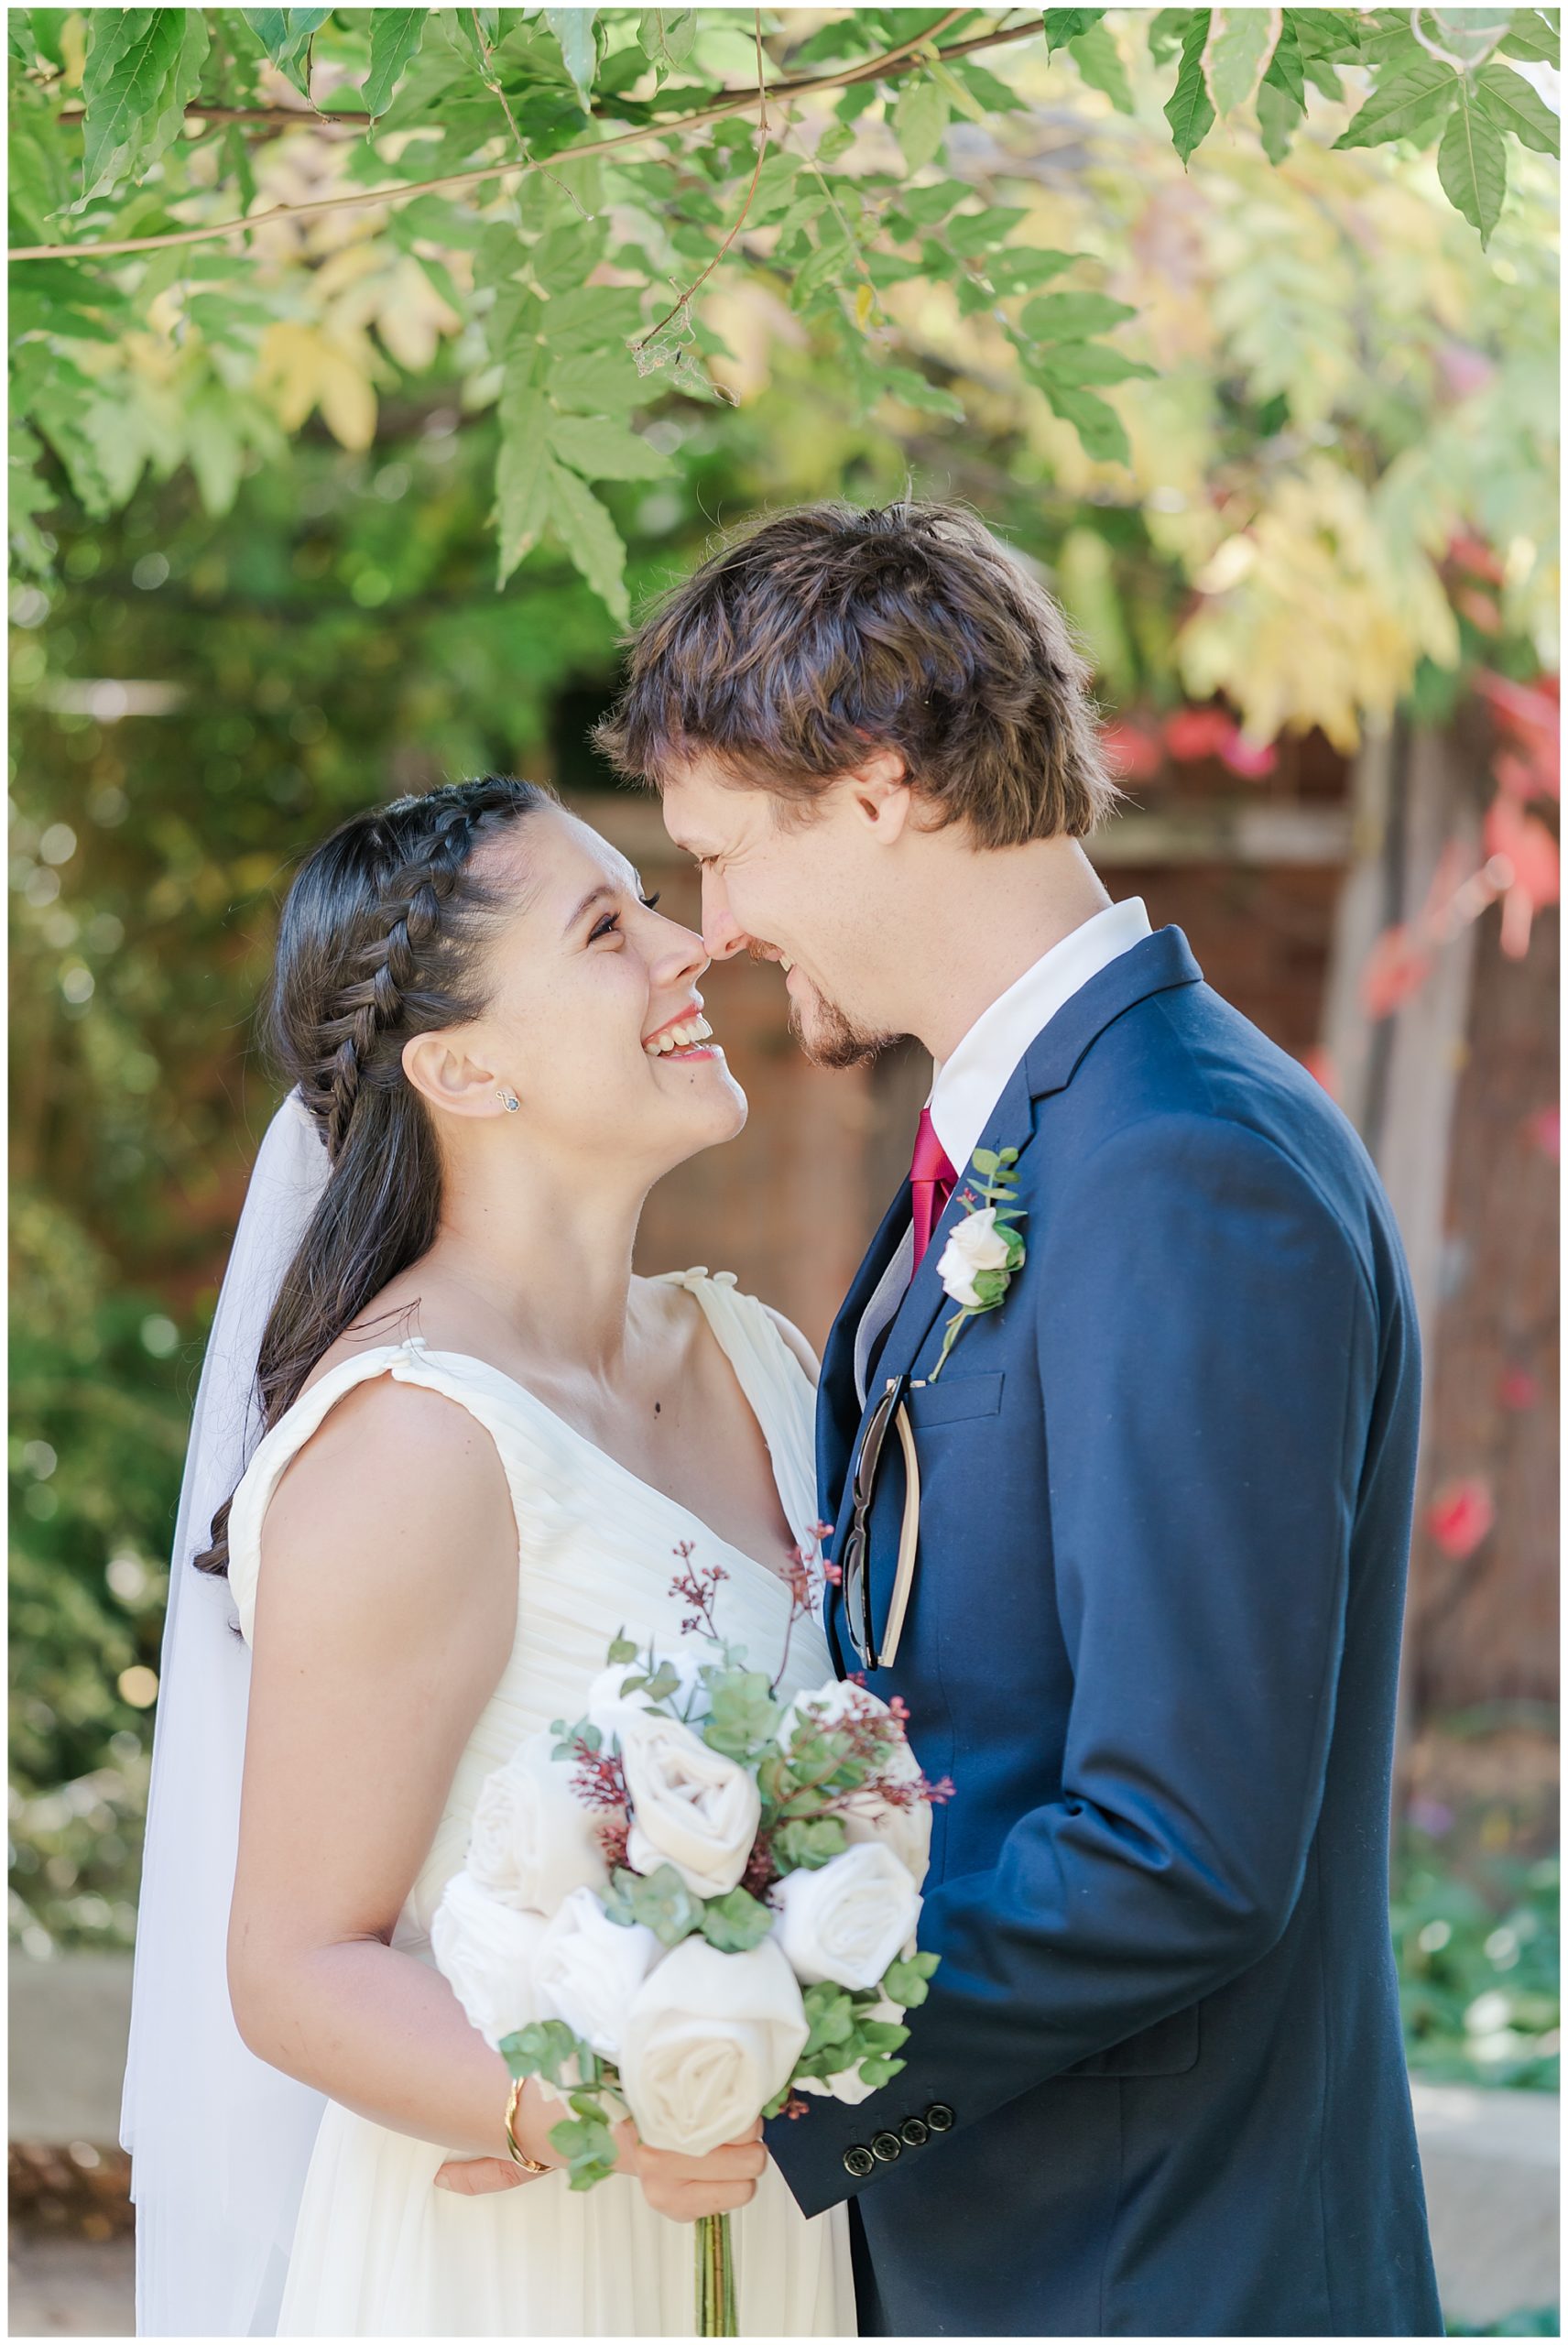 Bride and groom laughing| Australian Wedding photography